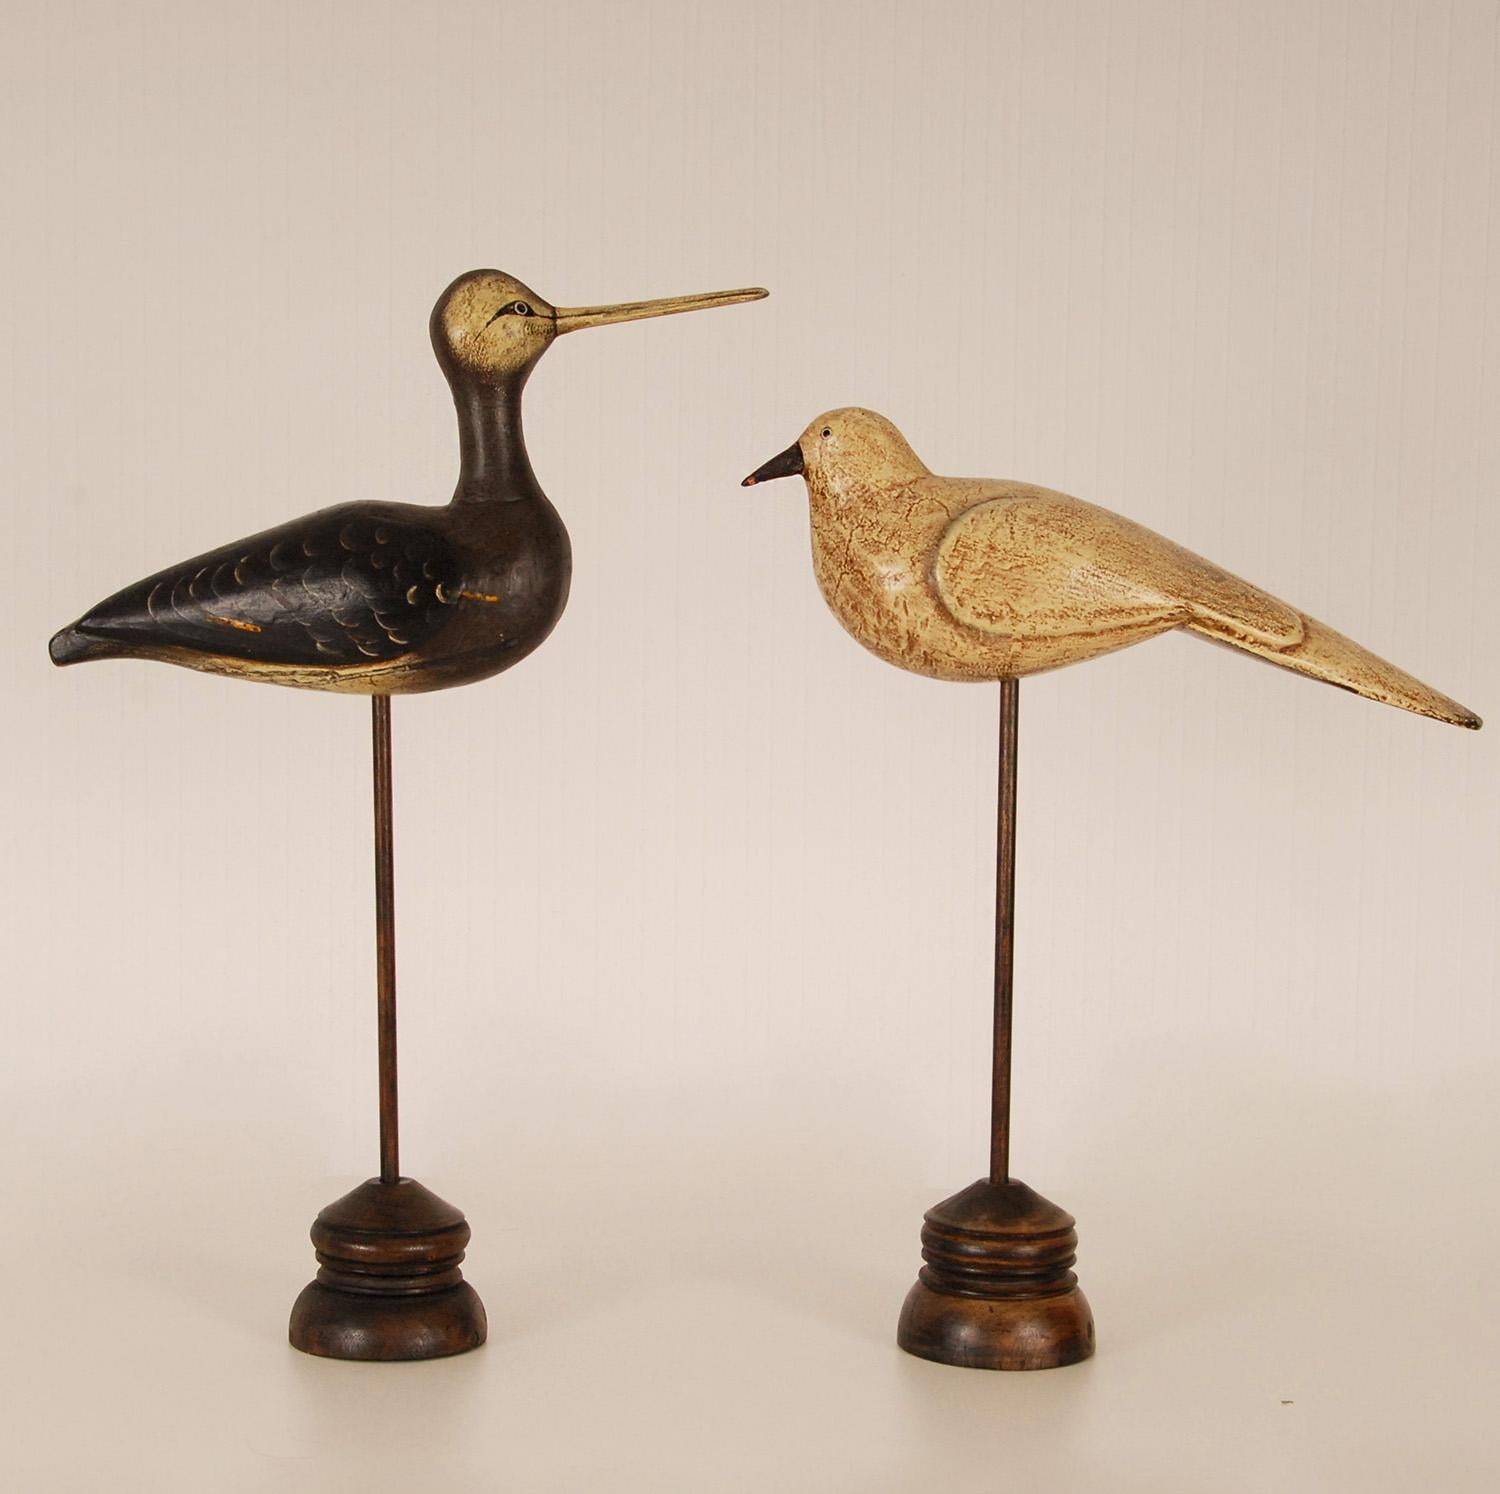 Vintage pair French hand carved Decoy birds
Depicting a shore bird and a dove
Style: Mid century, Vintage, Antique
Both birds are on a wooden stand and hand painted in fabulous colours
Origin France 1950s
Condition : Good
Highly decorative in